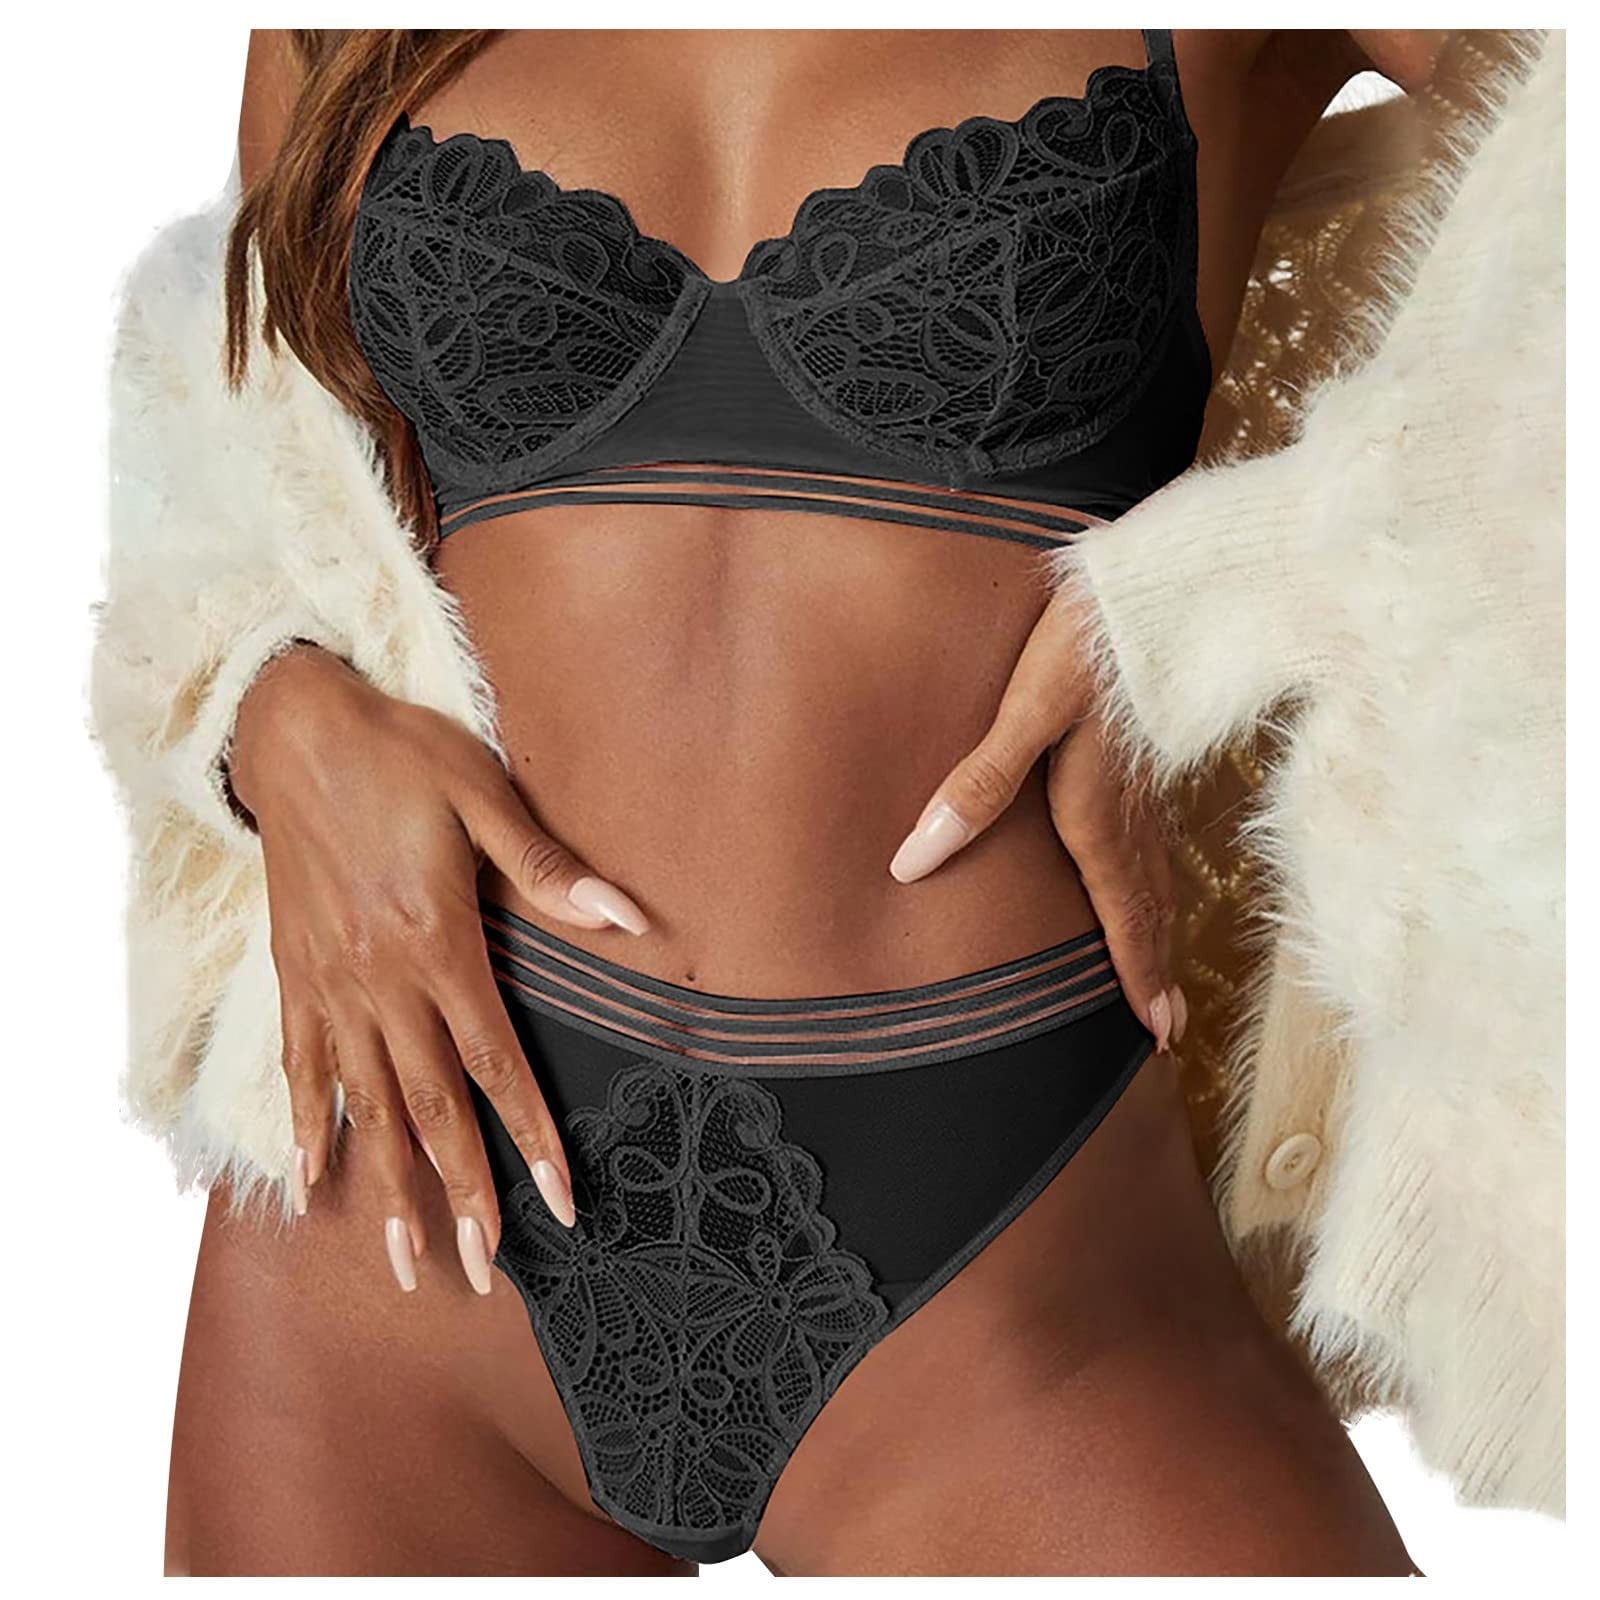 VerPetridure Sexy Lingerie for Women Plus Size Breast Support Underwear  Temptation Perspective Suit Nightdress Hollow Lace Hot